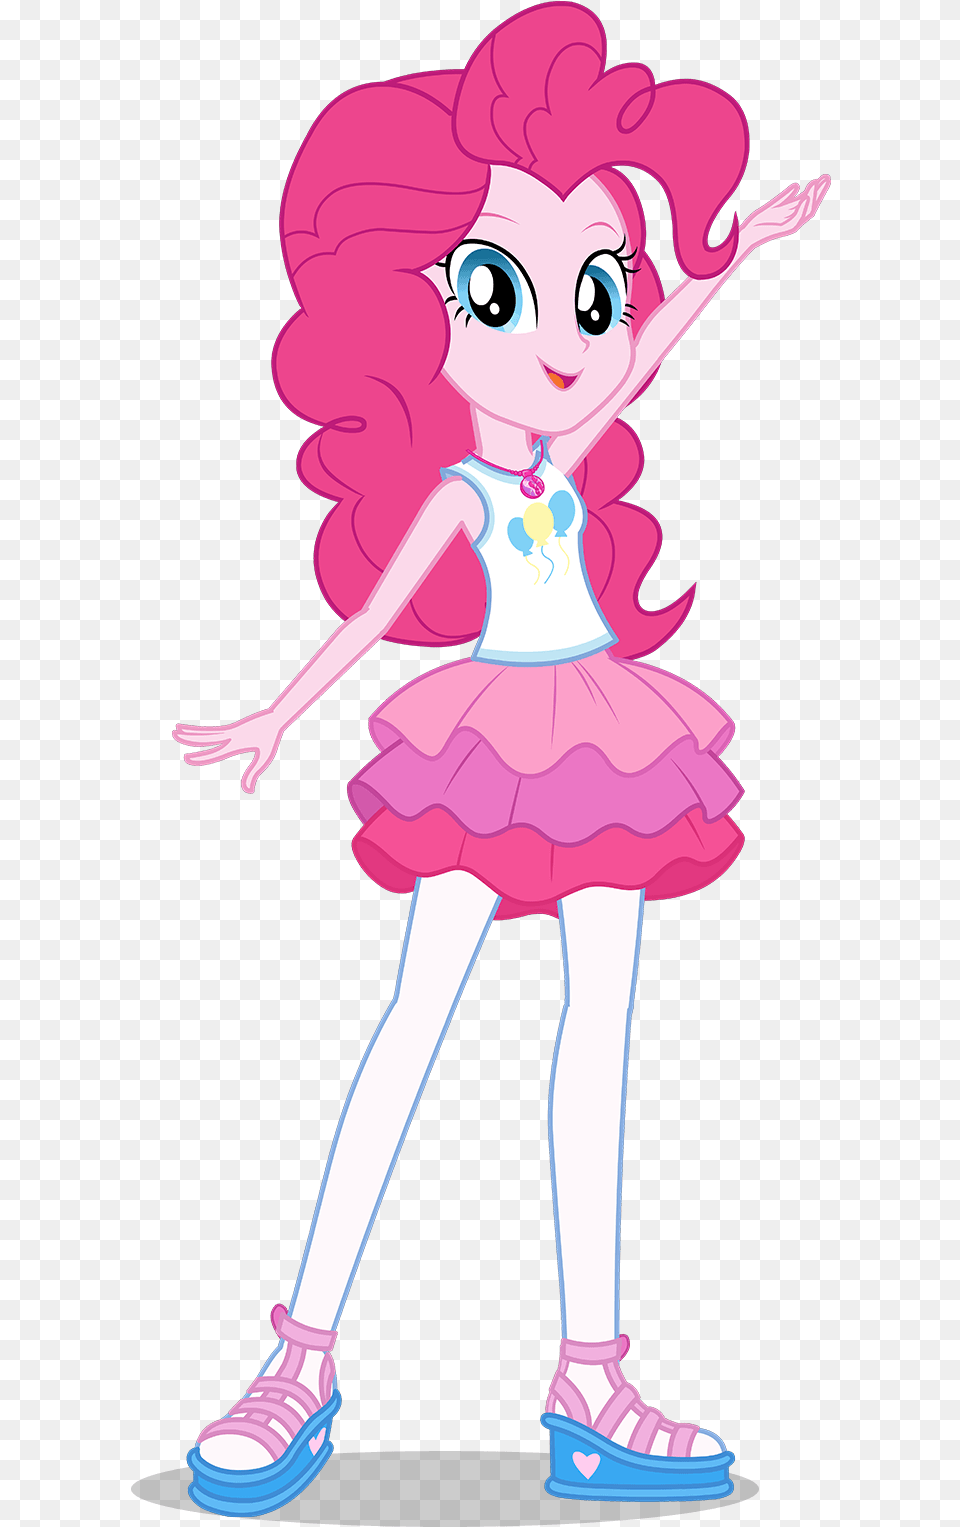 Pinkie Pie Images Equestria Girls Digital Series Pinkie Mlp Pinkie Pie Better Together, Child, Dancing, Female, Girl Free Transparent Png